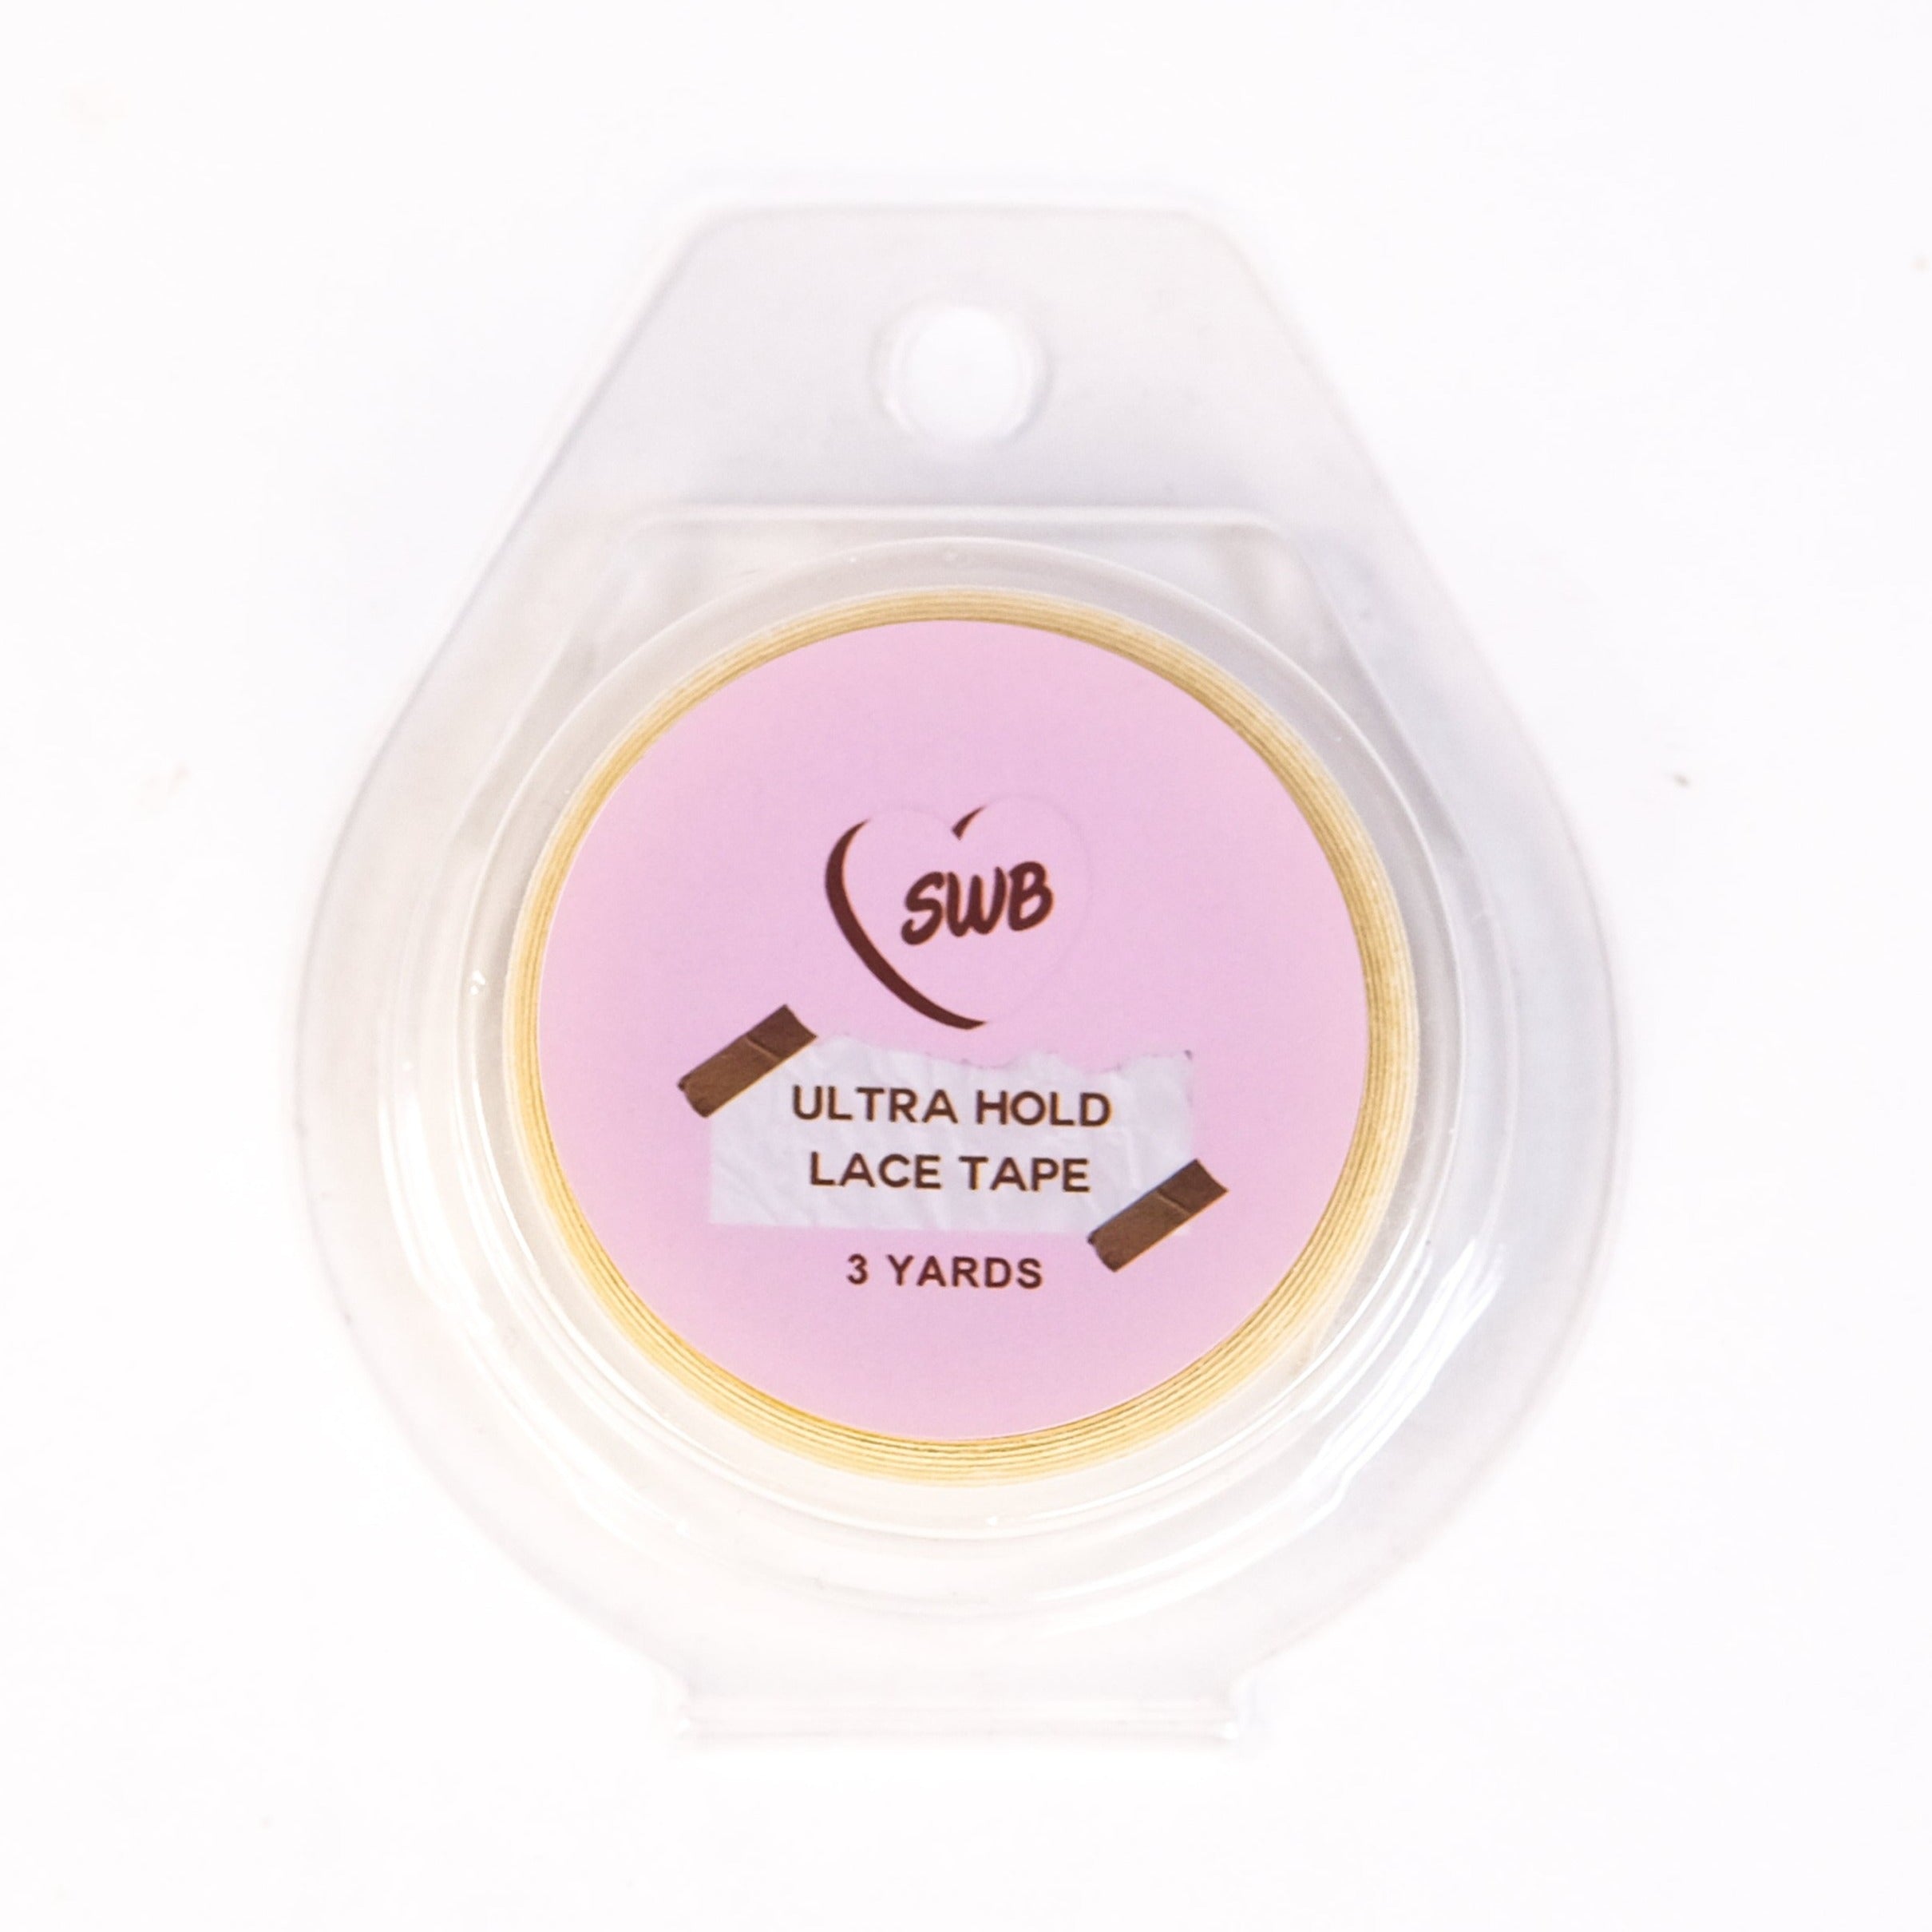 Ultra Hold Lace Tape – Shop Will Beauty